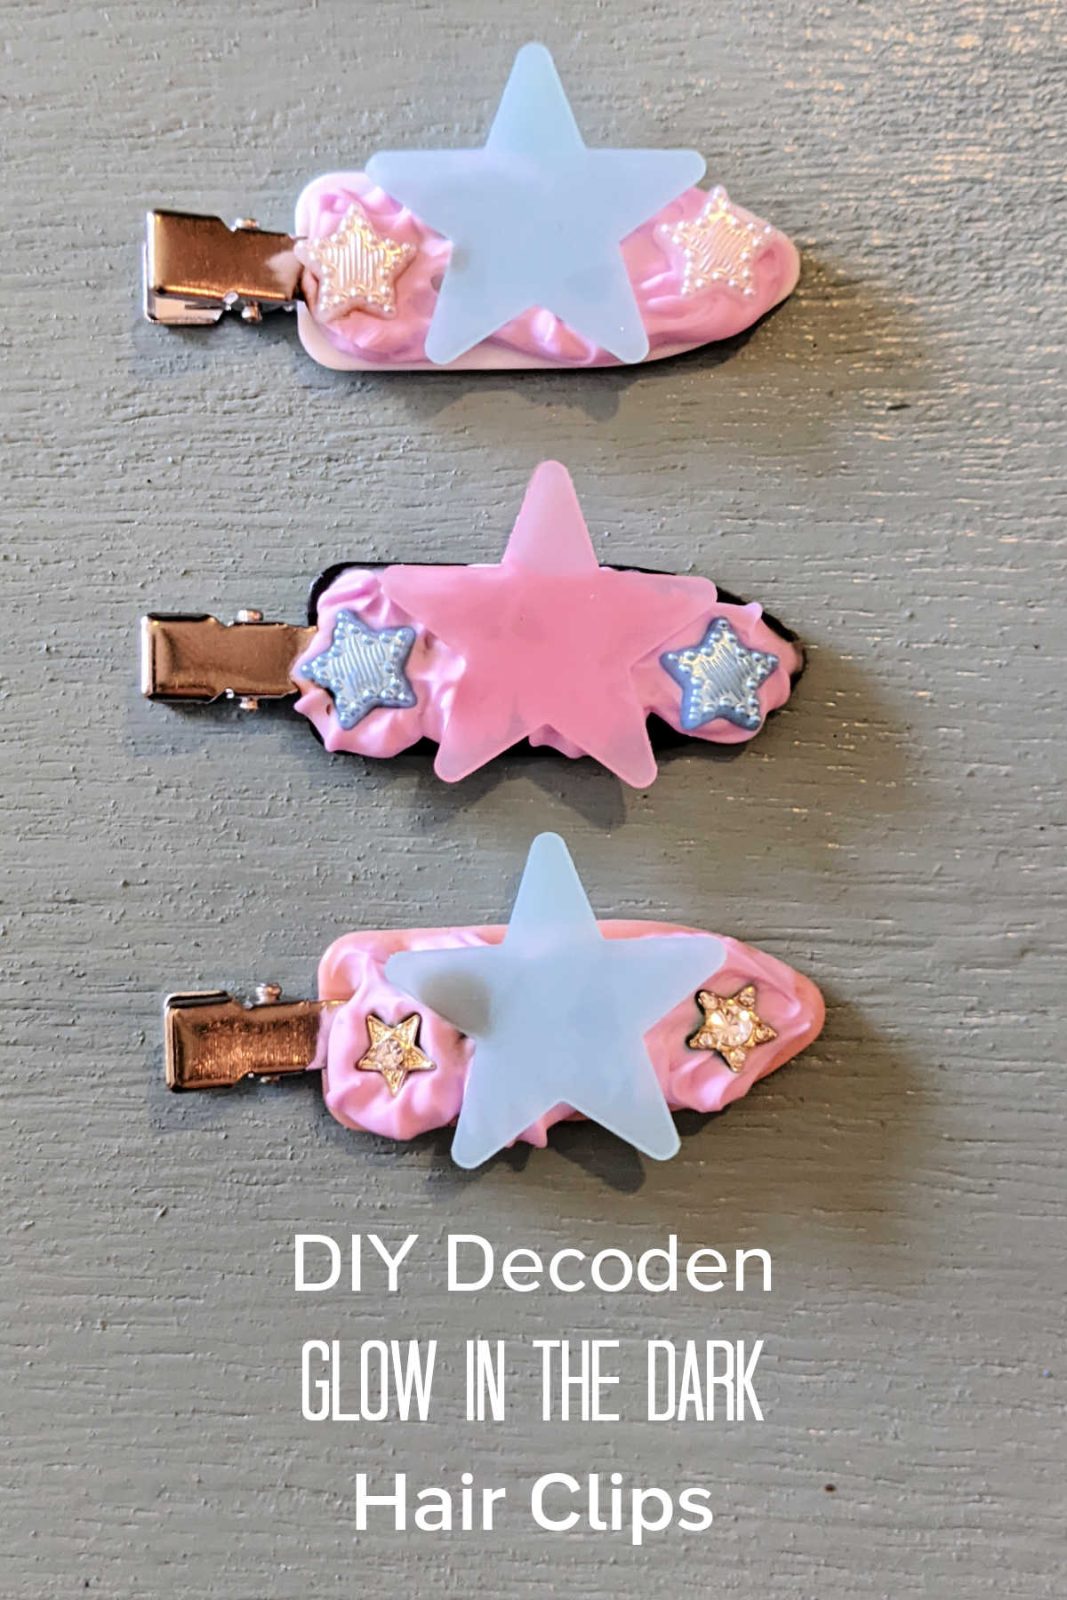 Blast off into a galaxy of fun with this easy DIY Glow-in-the-Dark Hair Clips craft! Good for kids and adults, this project uses whipped cream glue and glow-in-the-dark stars to create out-of-this-world hair accessories. A perfect craft for stargazers, space enthusiasts, or anyone who loves to sparkle!